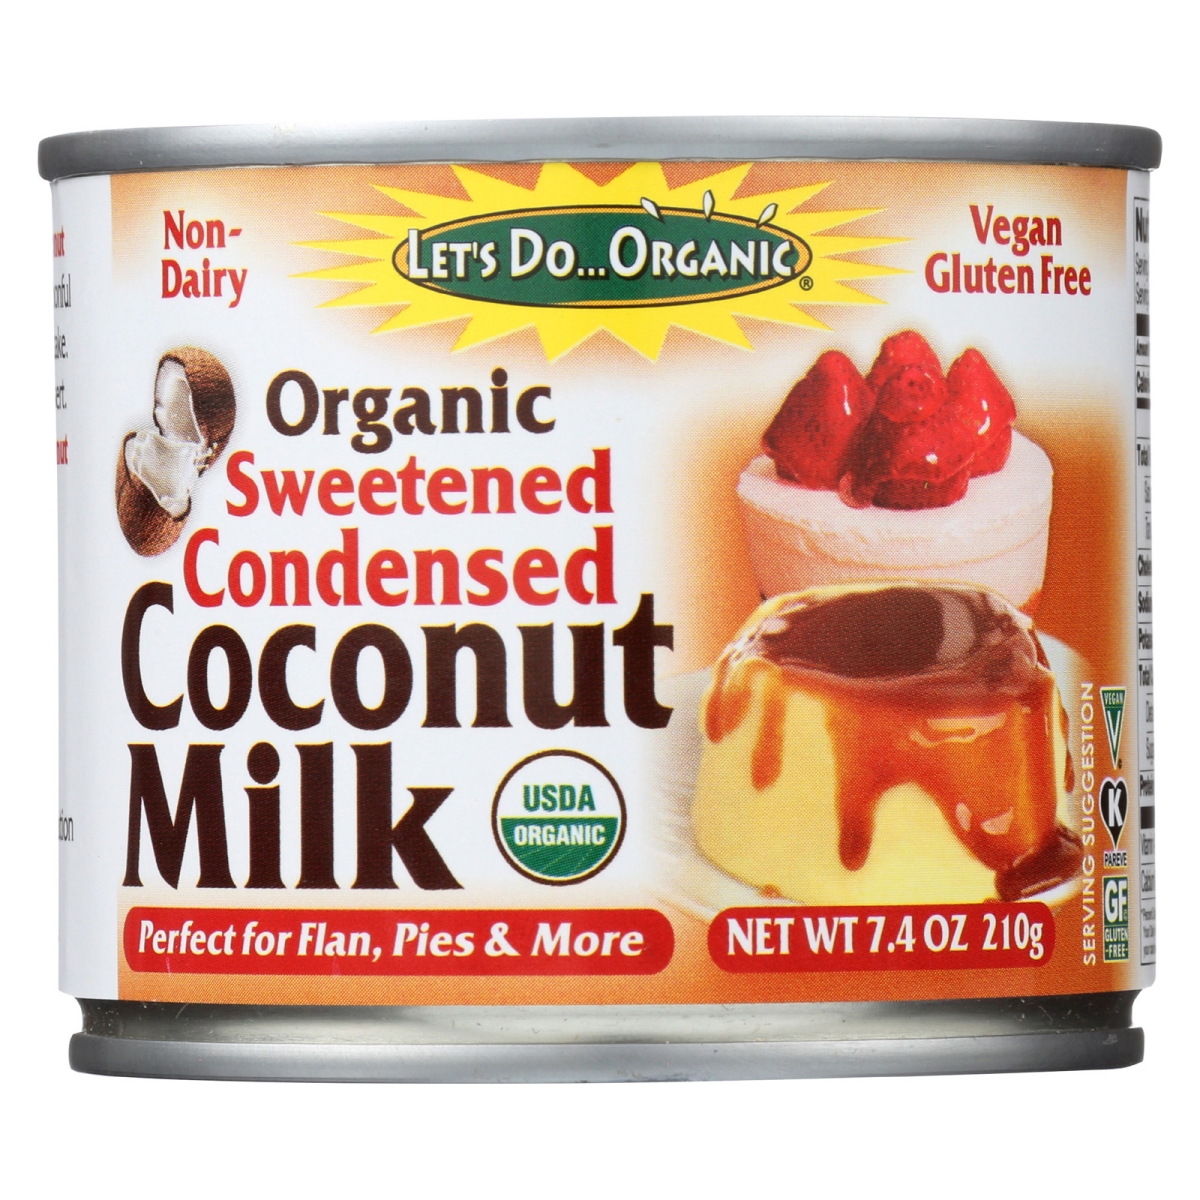 Picture of Lets Do Organic 1798396 7.4 fl oz Sweetened Condensed Organic Coconut Milk 